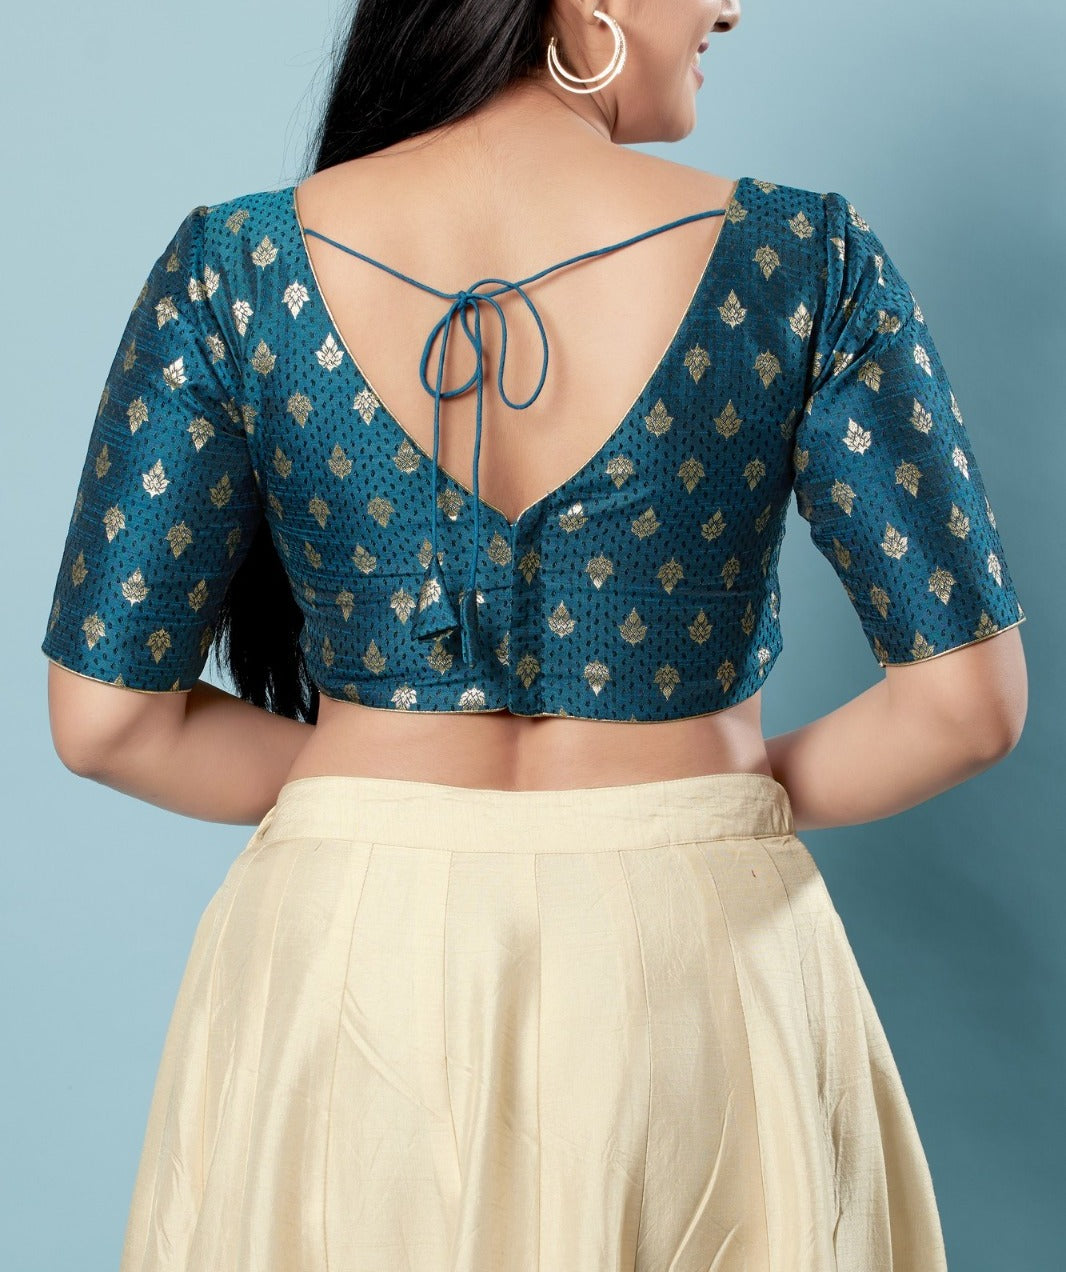 Alluring Teal Blue Color Designer Brocade Readymade Blouse With Butta Motifs For Women Near Me